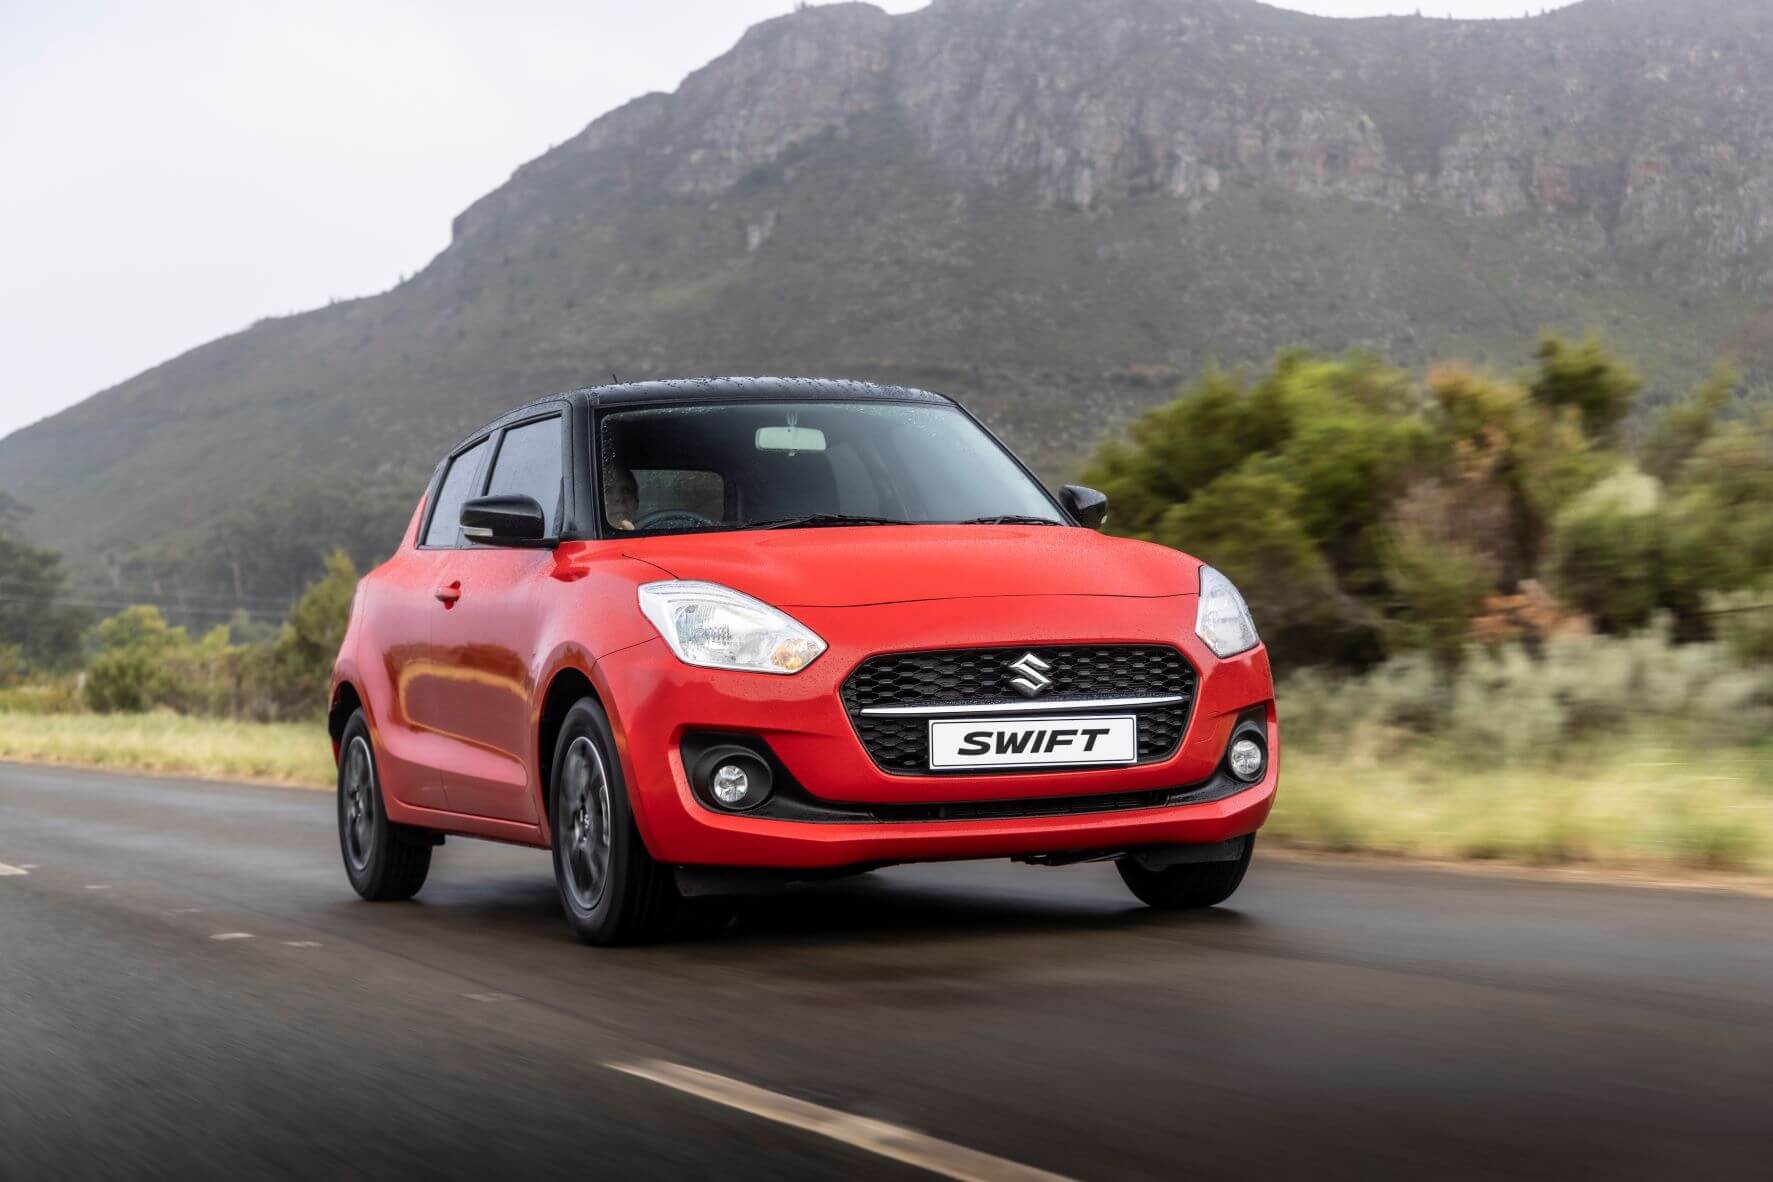 Our Best Small Cars For Under R200k